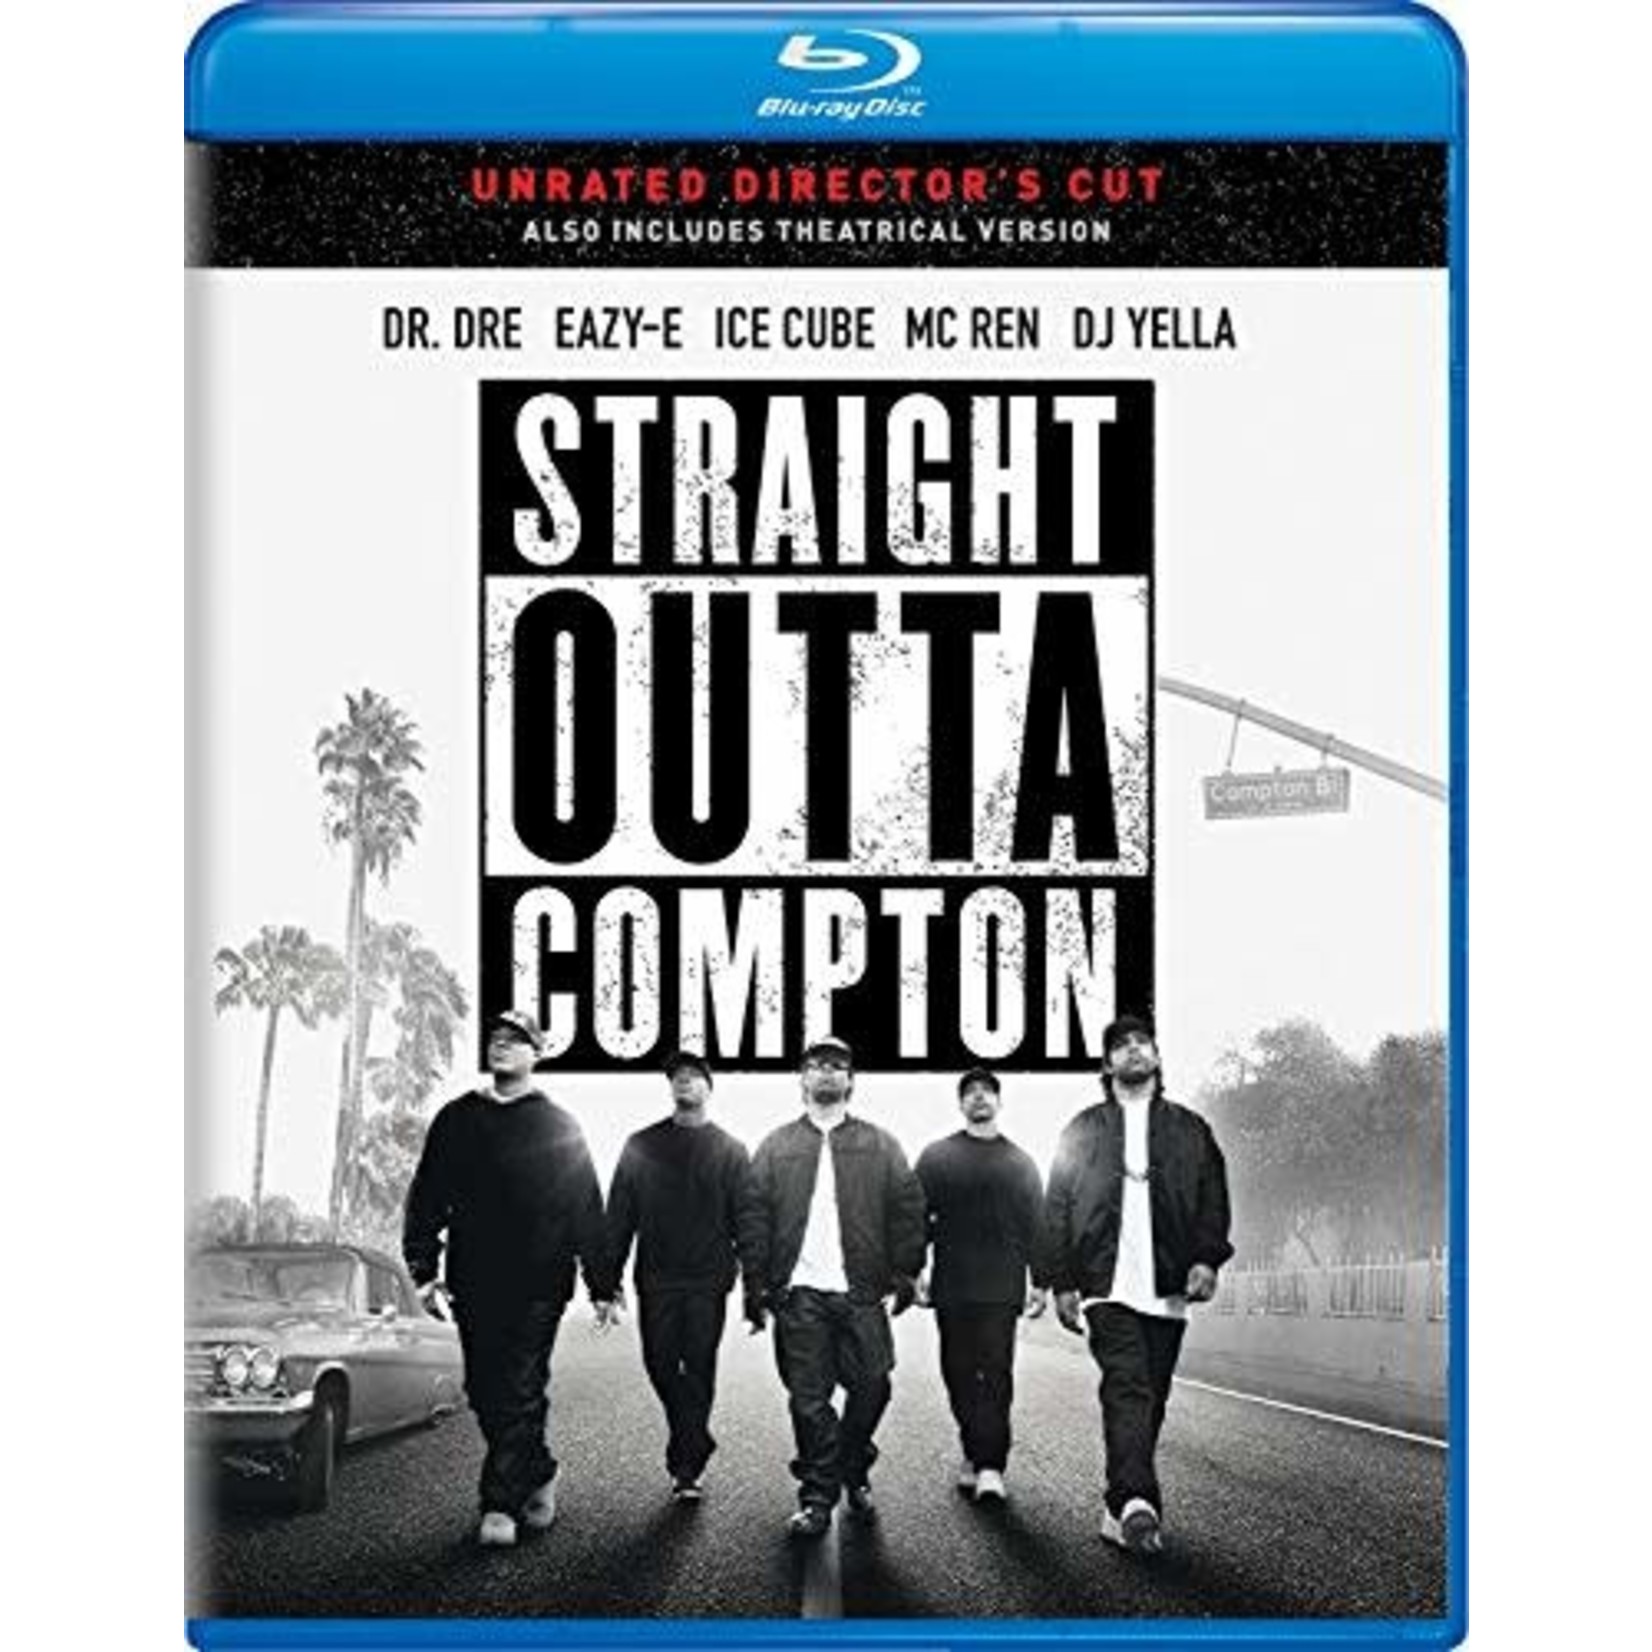 Straight Outta Compton (2015) [USED BRD/DVD]